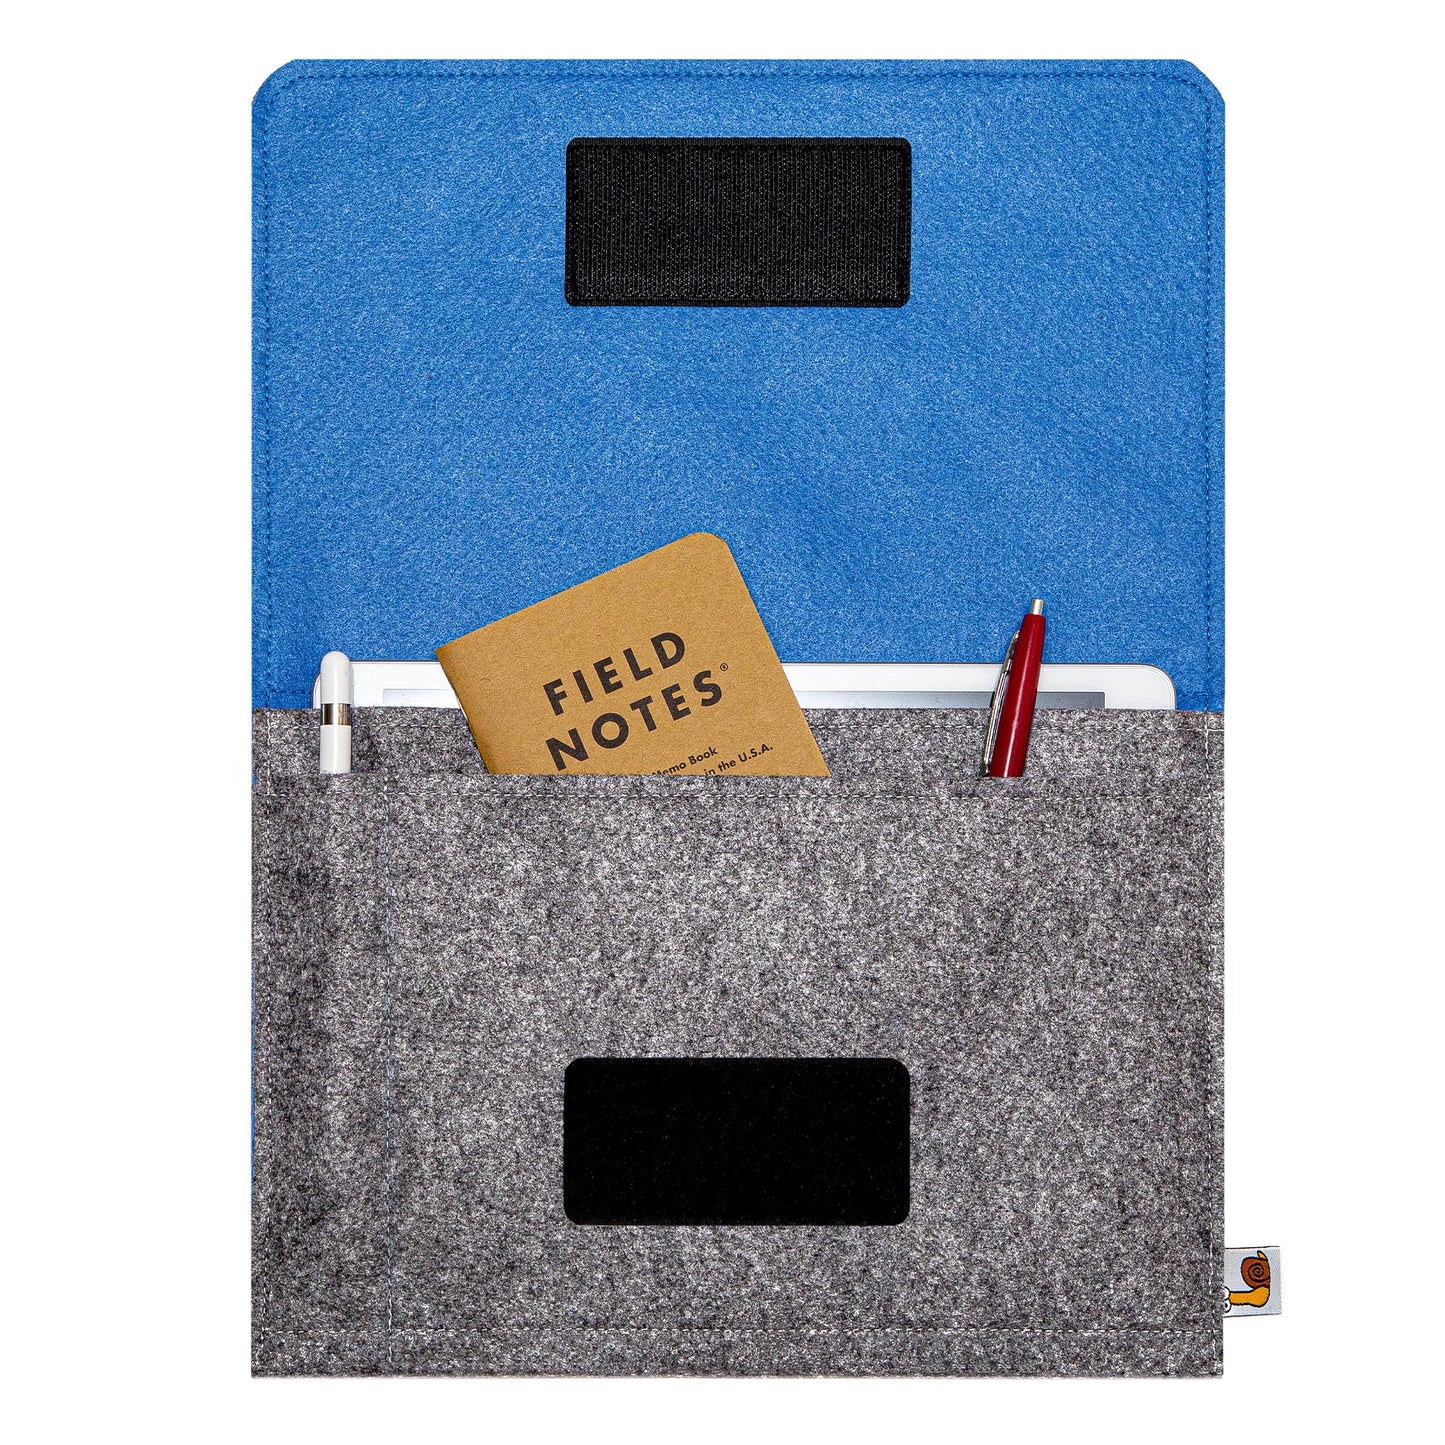 Premium Felt iPad Cover: Ultimate Protection with Accessories Pocket - Grey & Blue